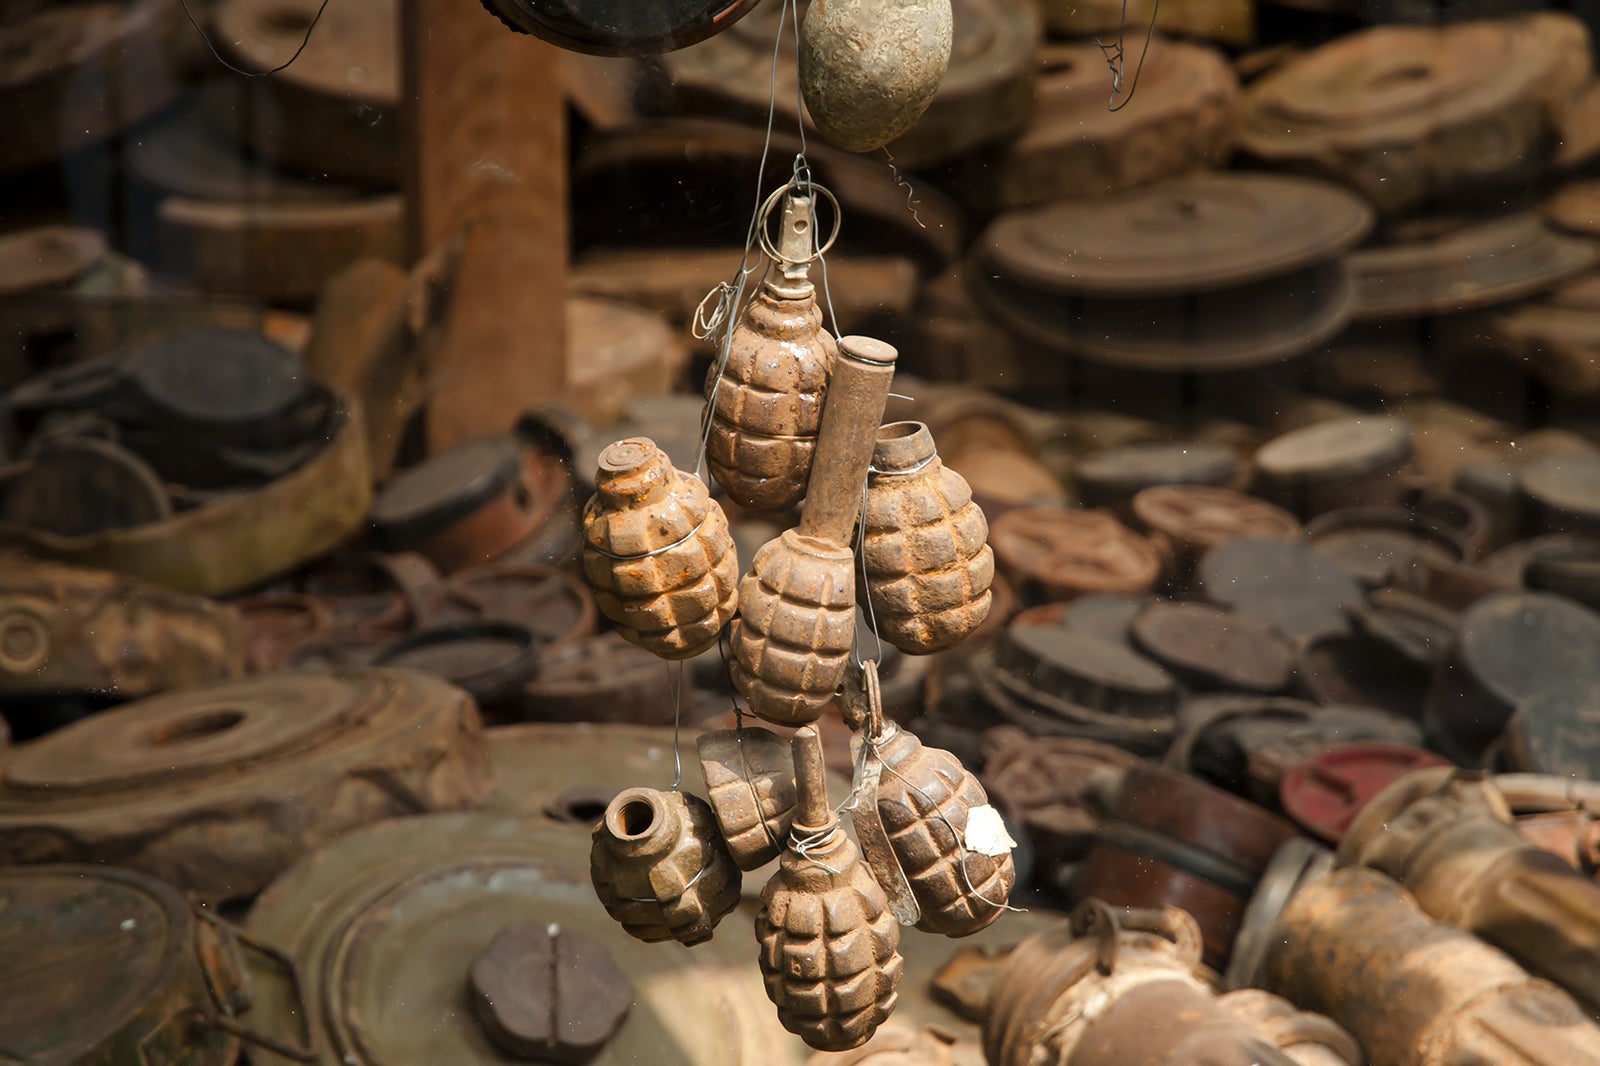 Cambodia Landmine Museum - Can't-Miss Attractions in Cambodia